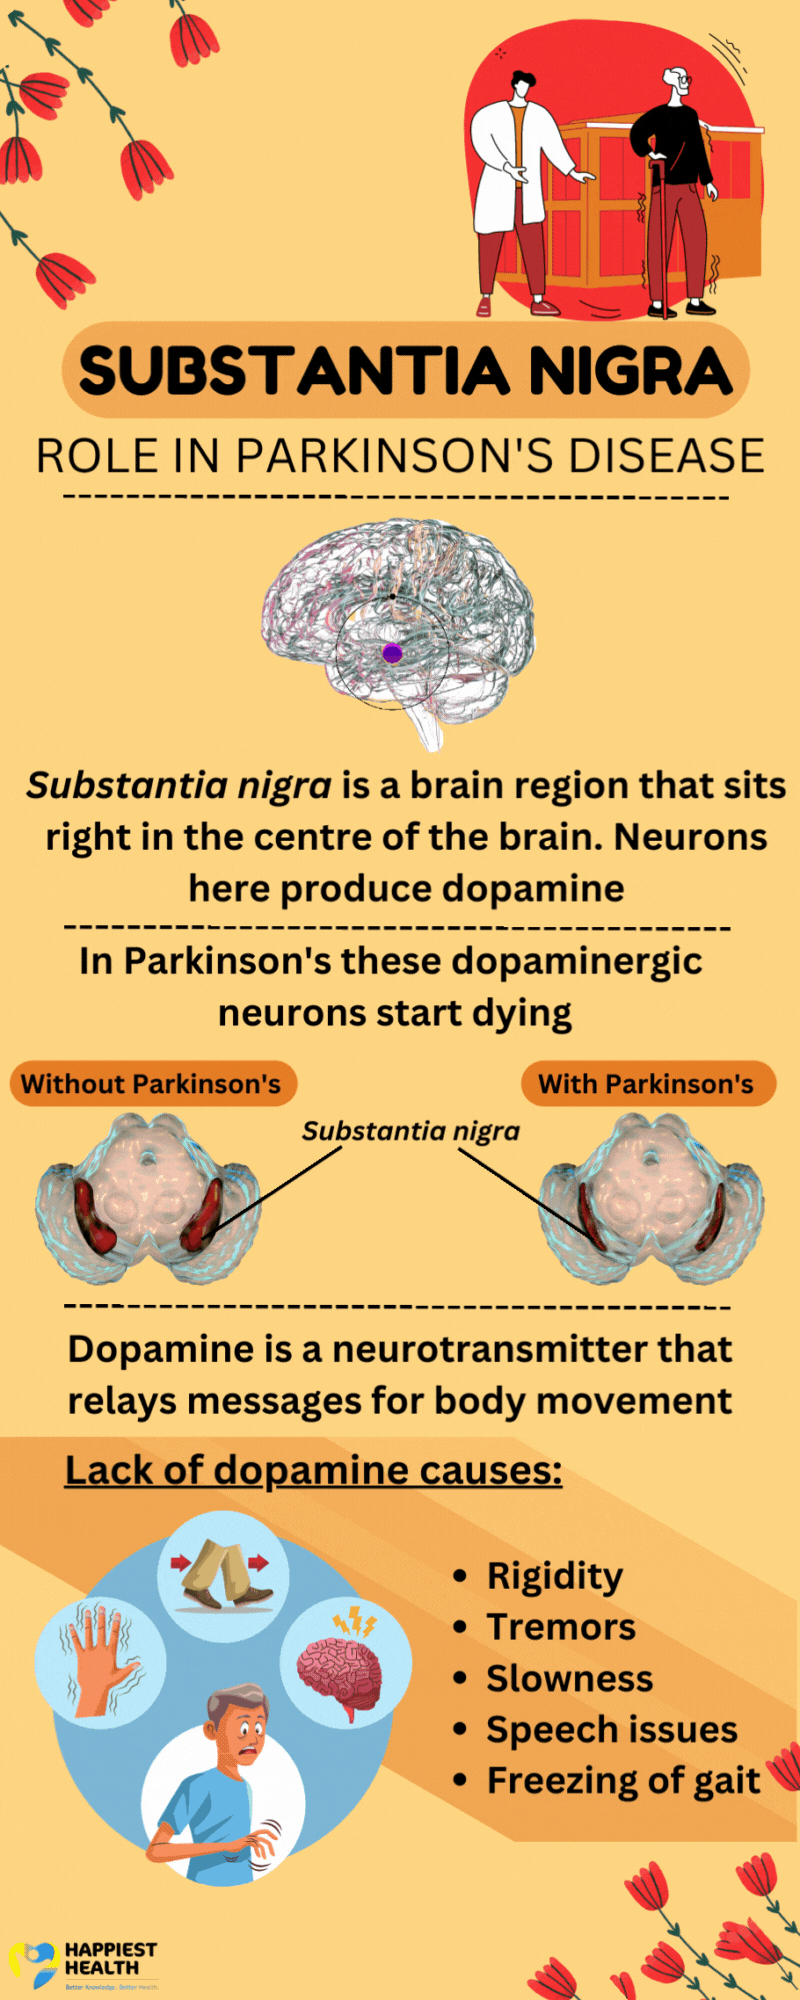 red tulips on the left top corner and right bottom corner- flowers representing Parkinson's. The top right corner has an image of a person with parkinson's and a doctor. Substantia Nigra- its role in Parkinson's disease Image of a side-view of the brain with an animation of dopamine chemical structure radiating from the midbrain , specifically from right above the basal ganglia, which is right above the amygdala. Substantia nigra is a brain region that sits right in the centre of the brain. Neurons here produce dopamine In Parkinson's these dopaminergic neurons start dying. Two images of the brain from a bottom view where a shrunken substantia nigra can be seen in the case of parkinson's. Dopamine is a neurotransmitter that relays messages for body movement Lack of dopamine causes: Rigidity Tremors Slowness Speech issues Freezing of gait with an image on the right of the text that shows the illustration of the symptoms